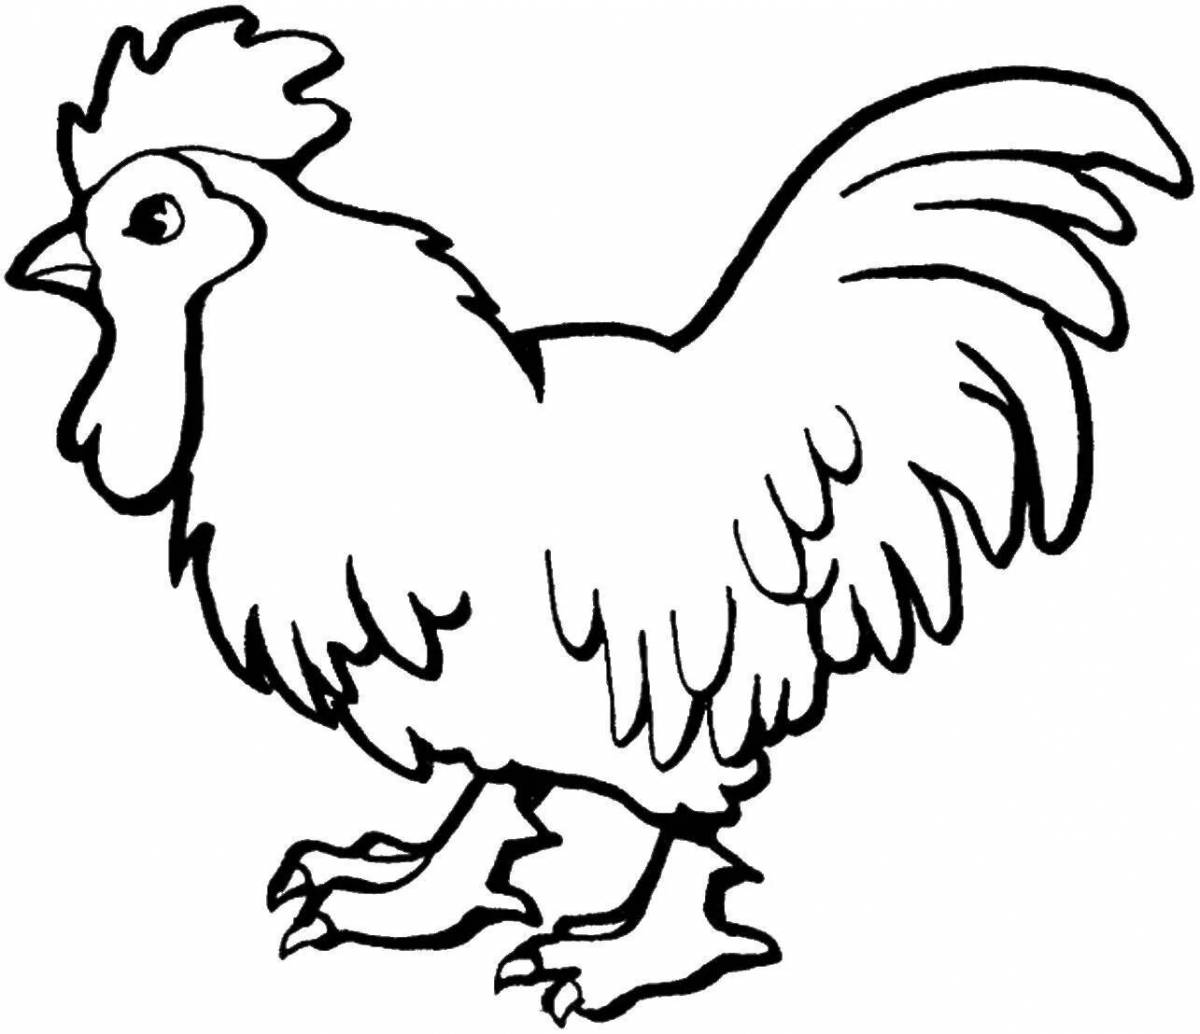 Coloring page dazzling rooster for kids